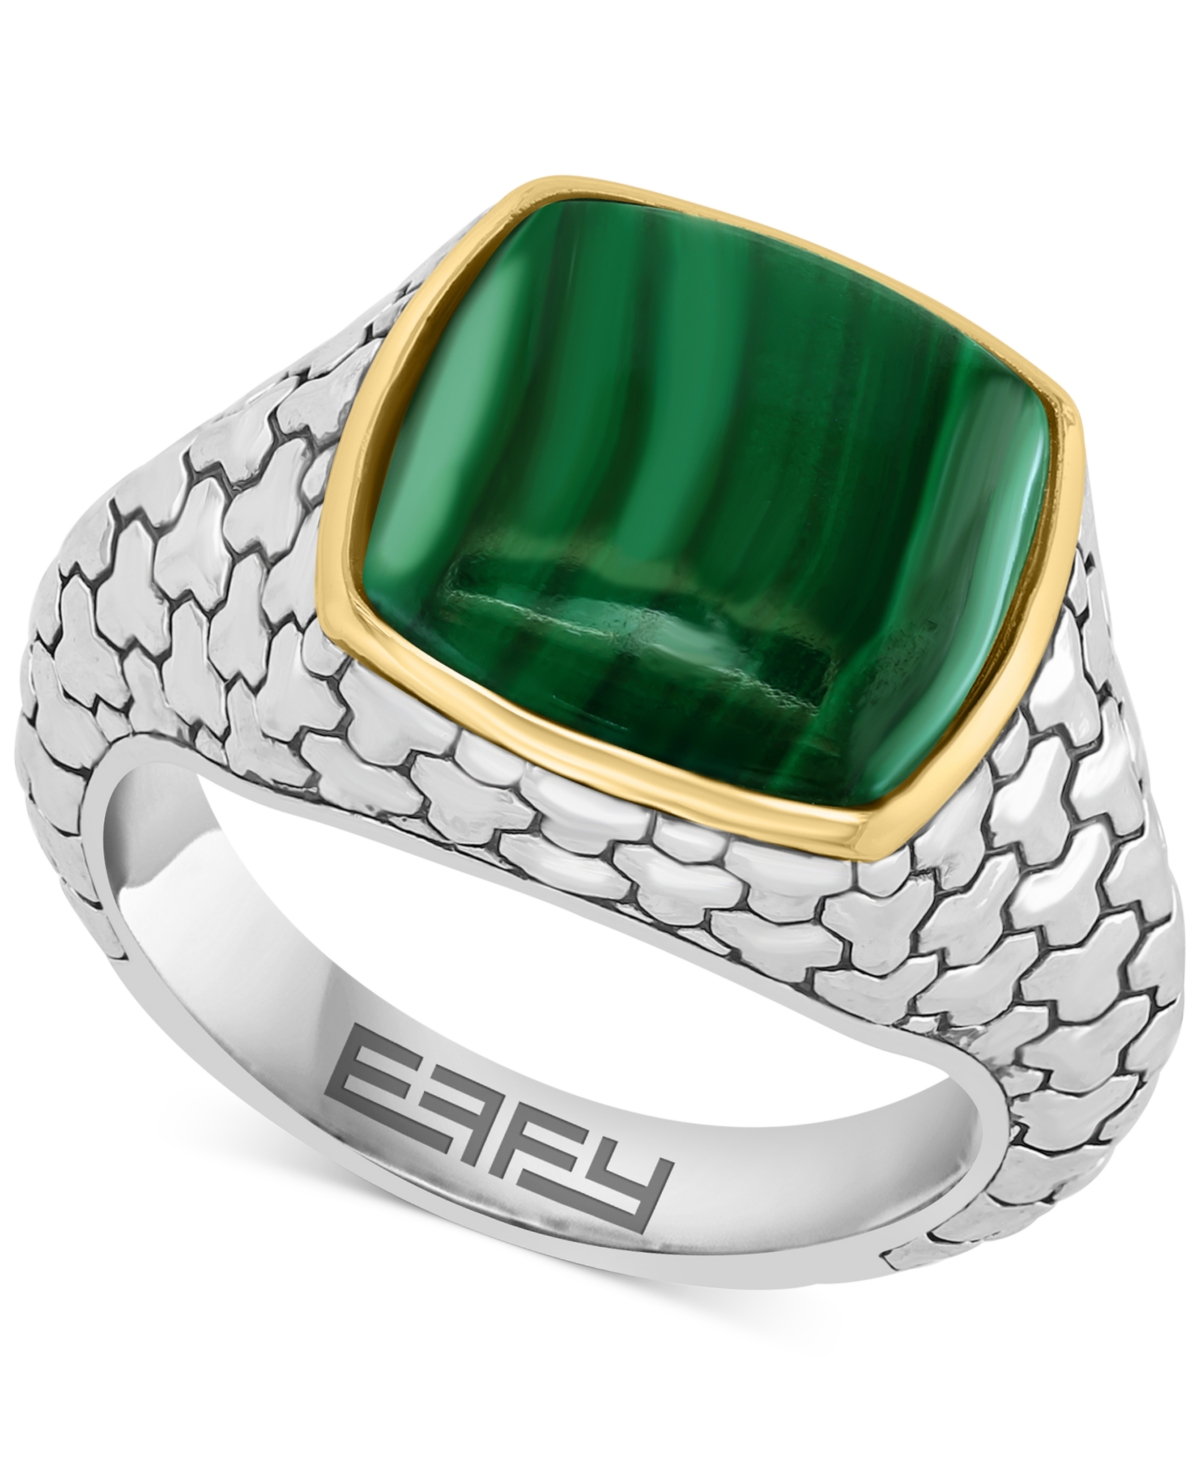 Effy Collection Effy Men's Malachite Patterned Ring In Sterling Silver And 14k Gold-plate